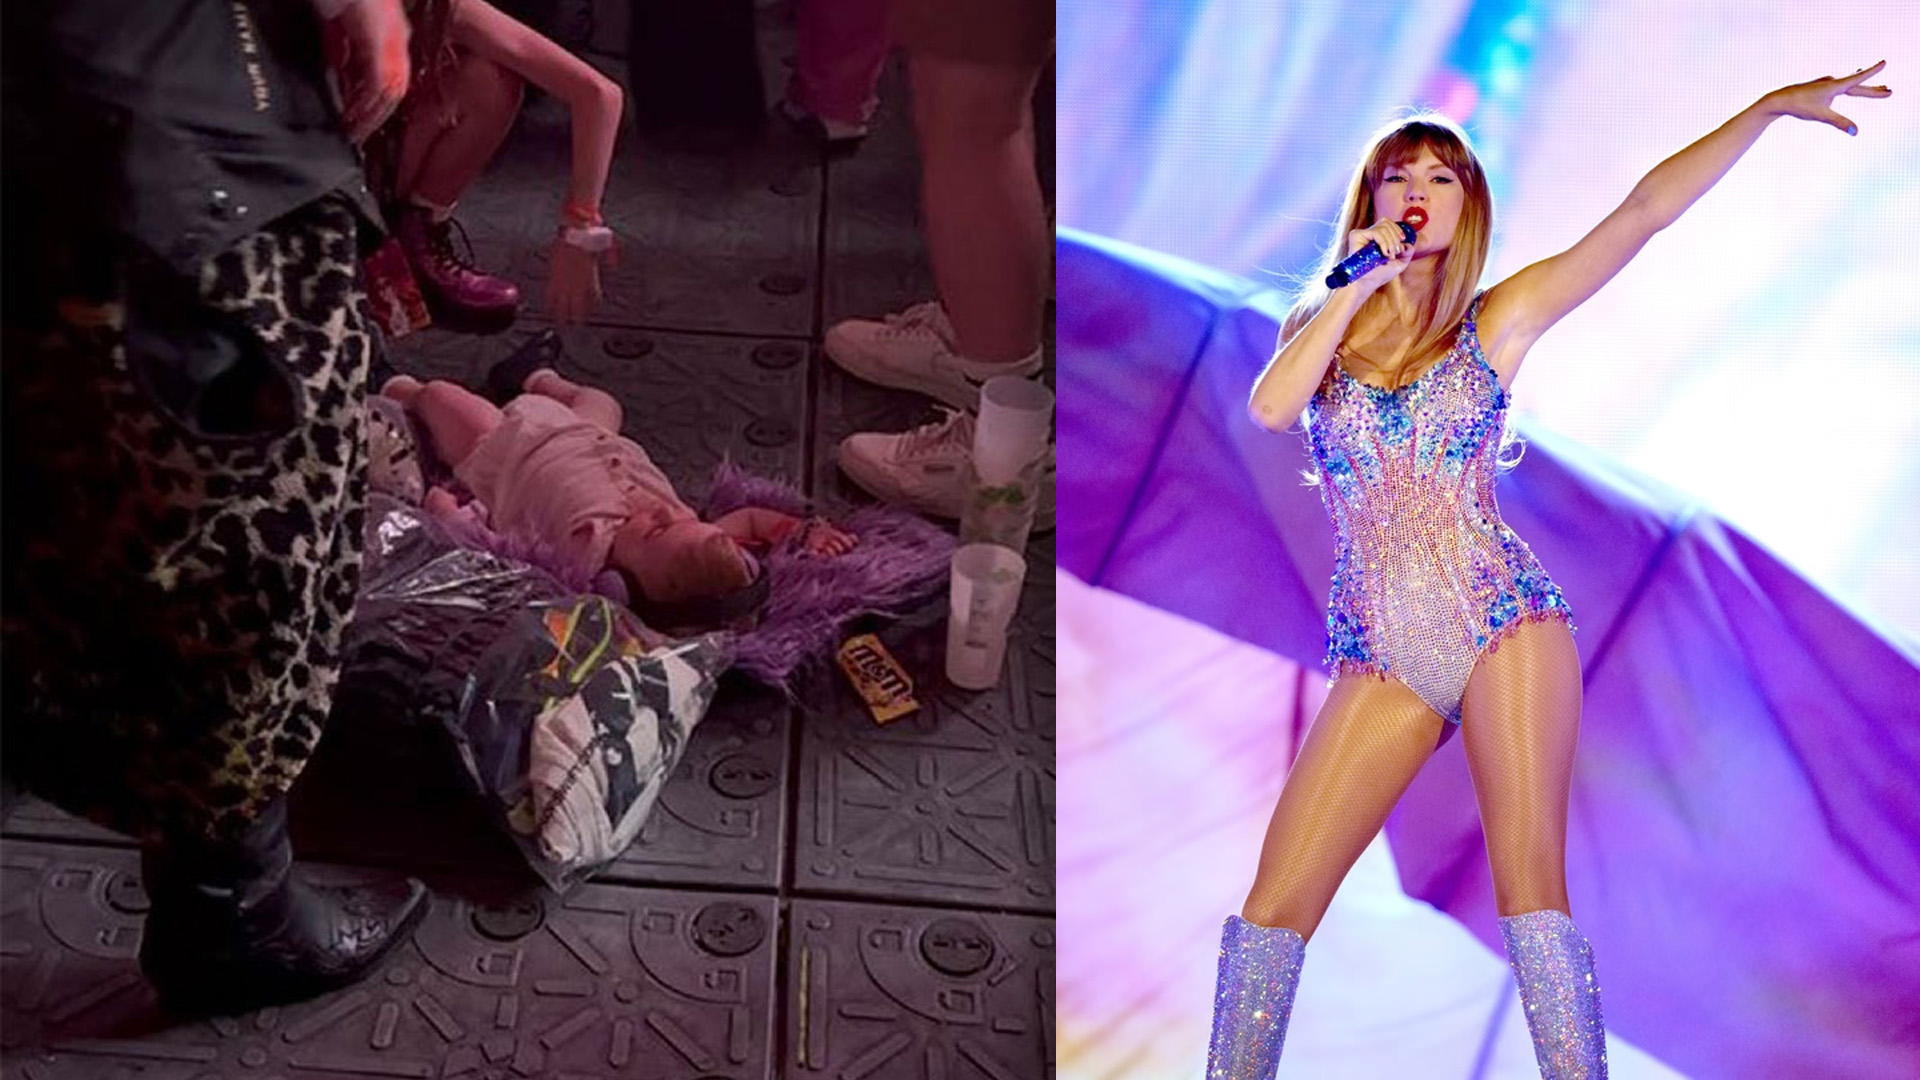 Outrage as Baby Left on Floor At Taylor Swift Concert: Venue Responds